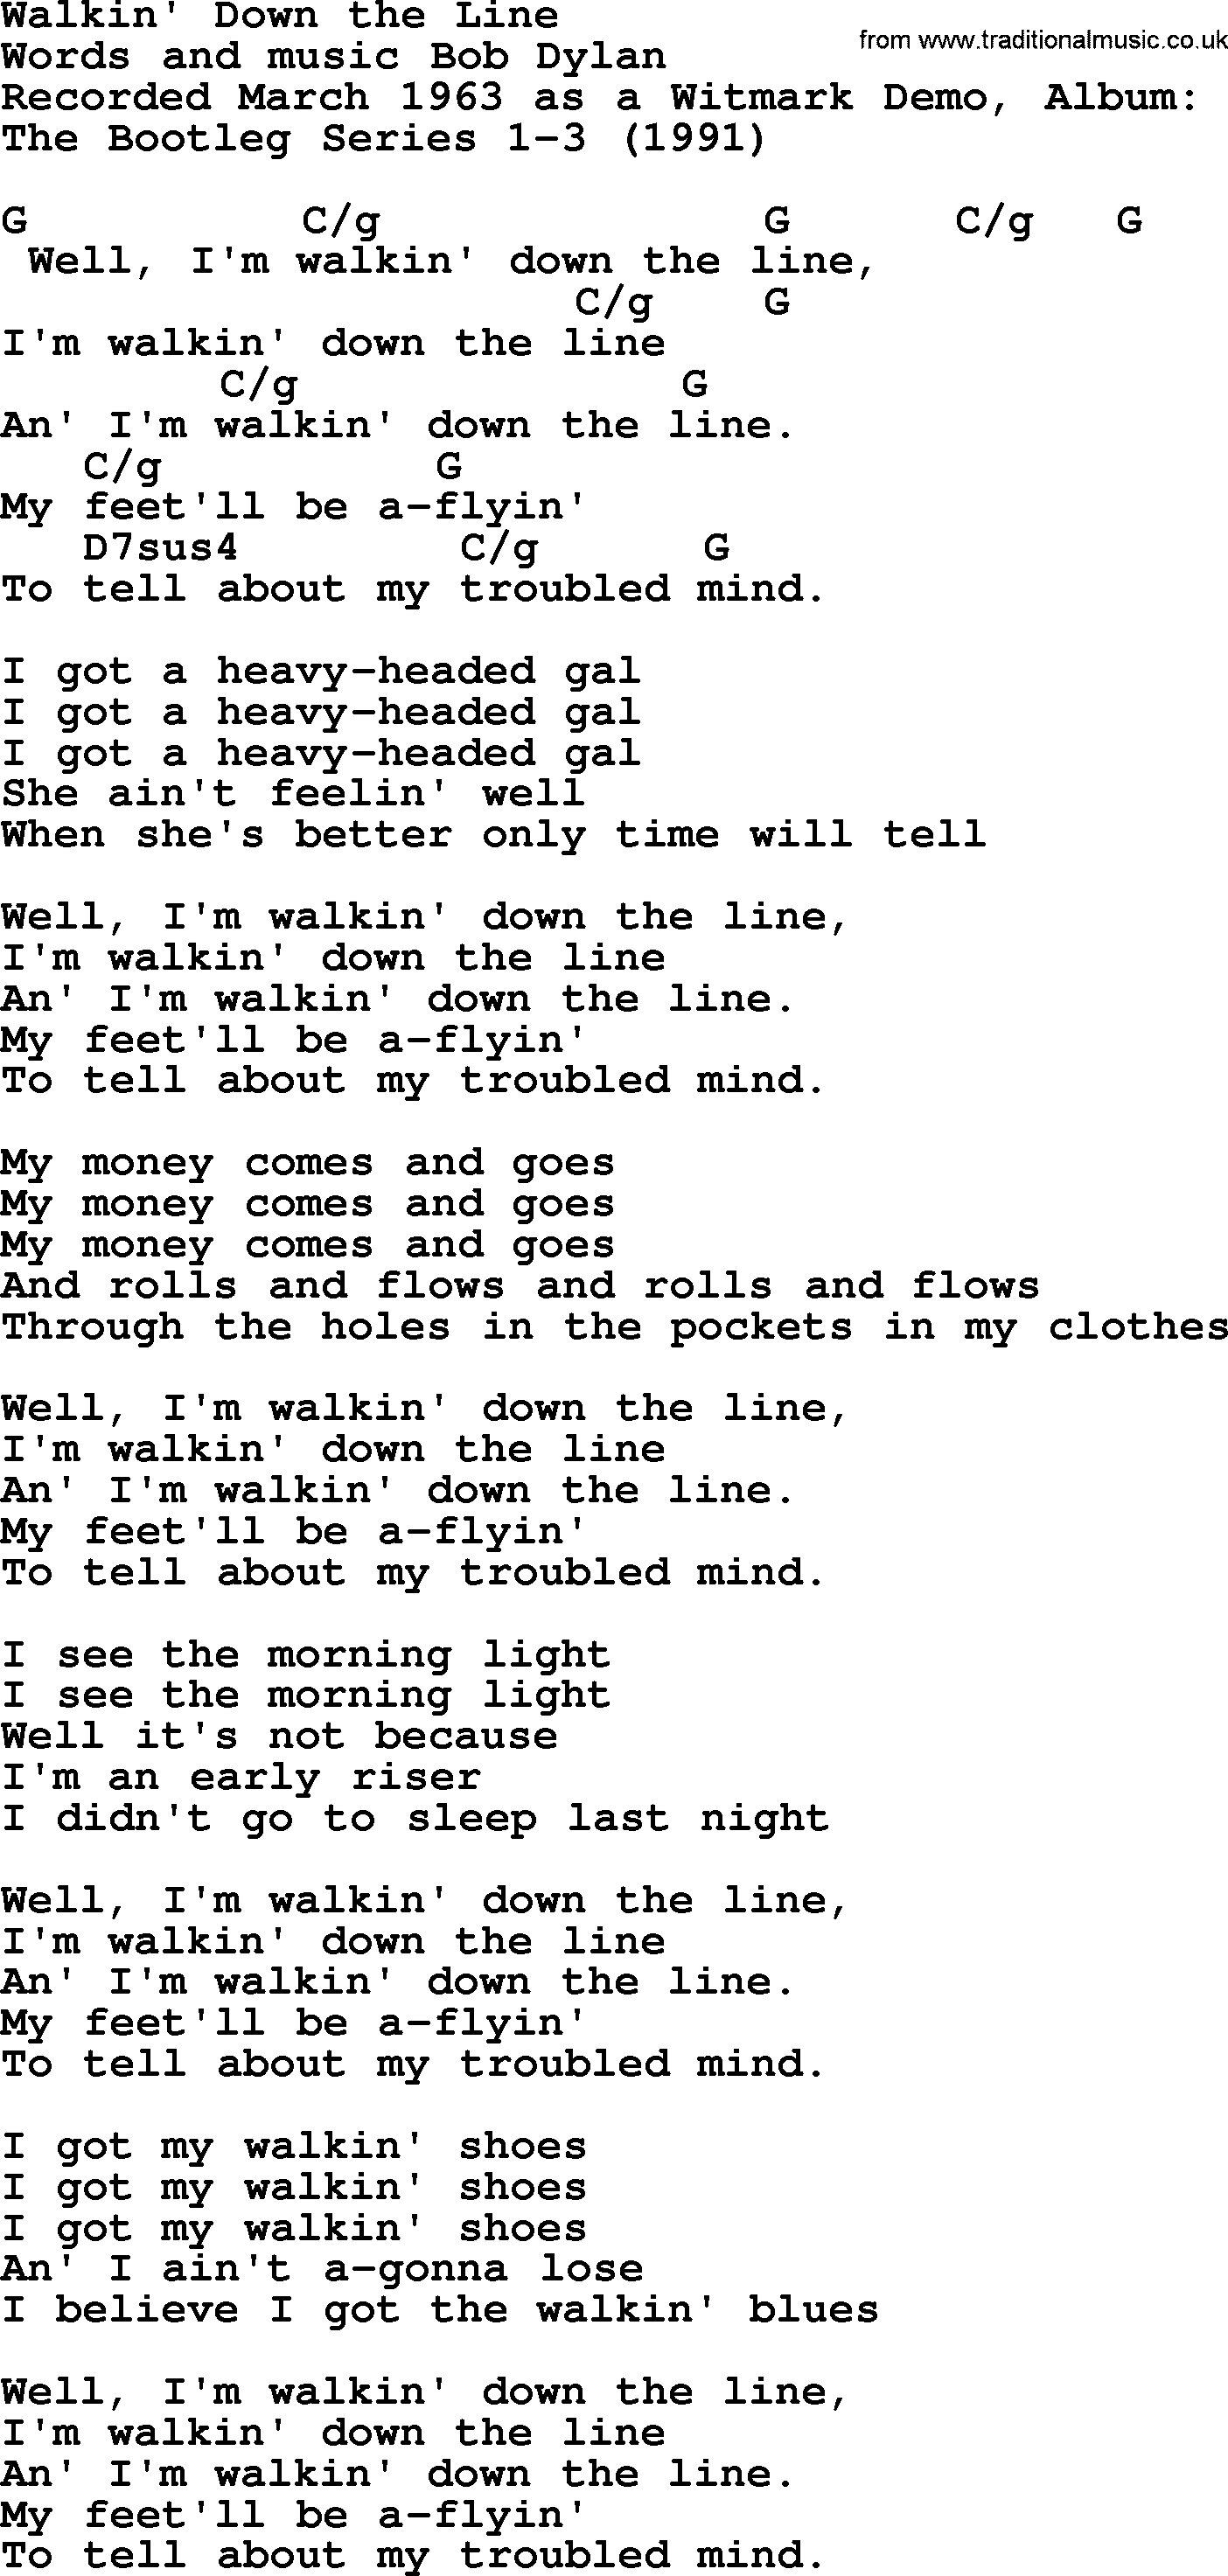 Bob Dylan song, lyrics with chords - Walkin' Down the Line